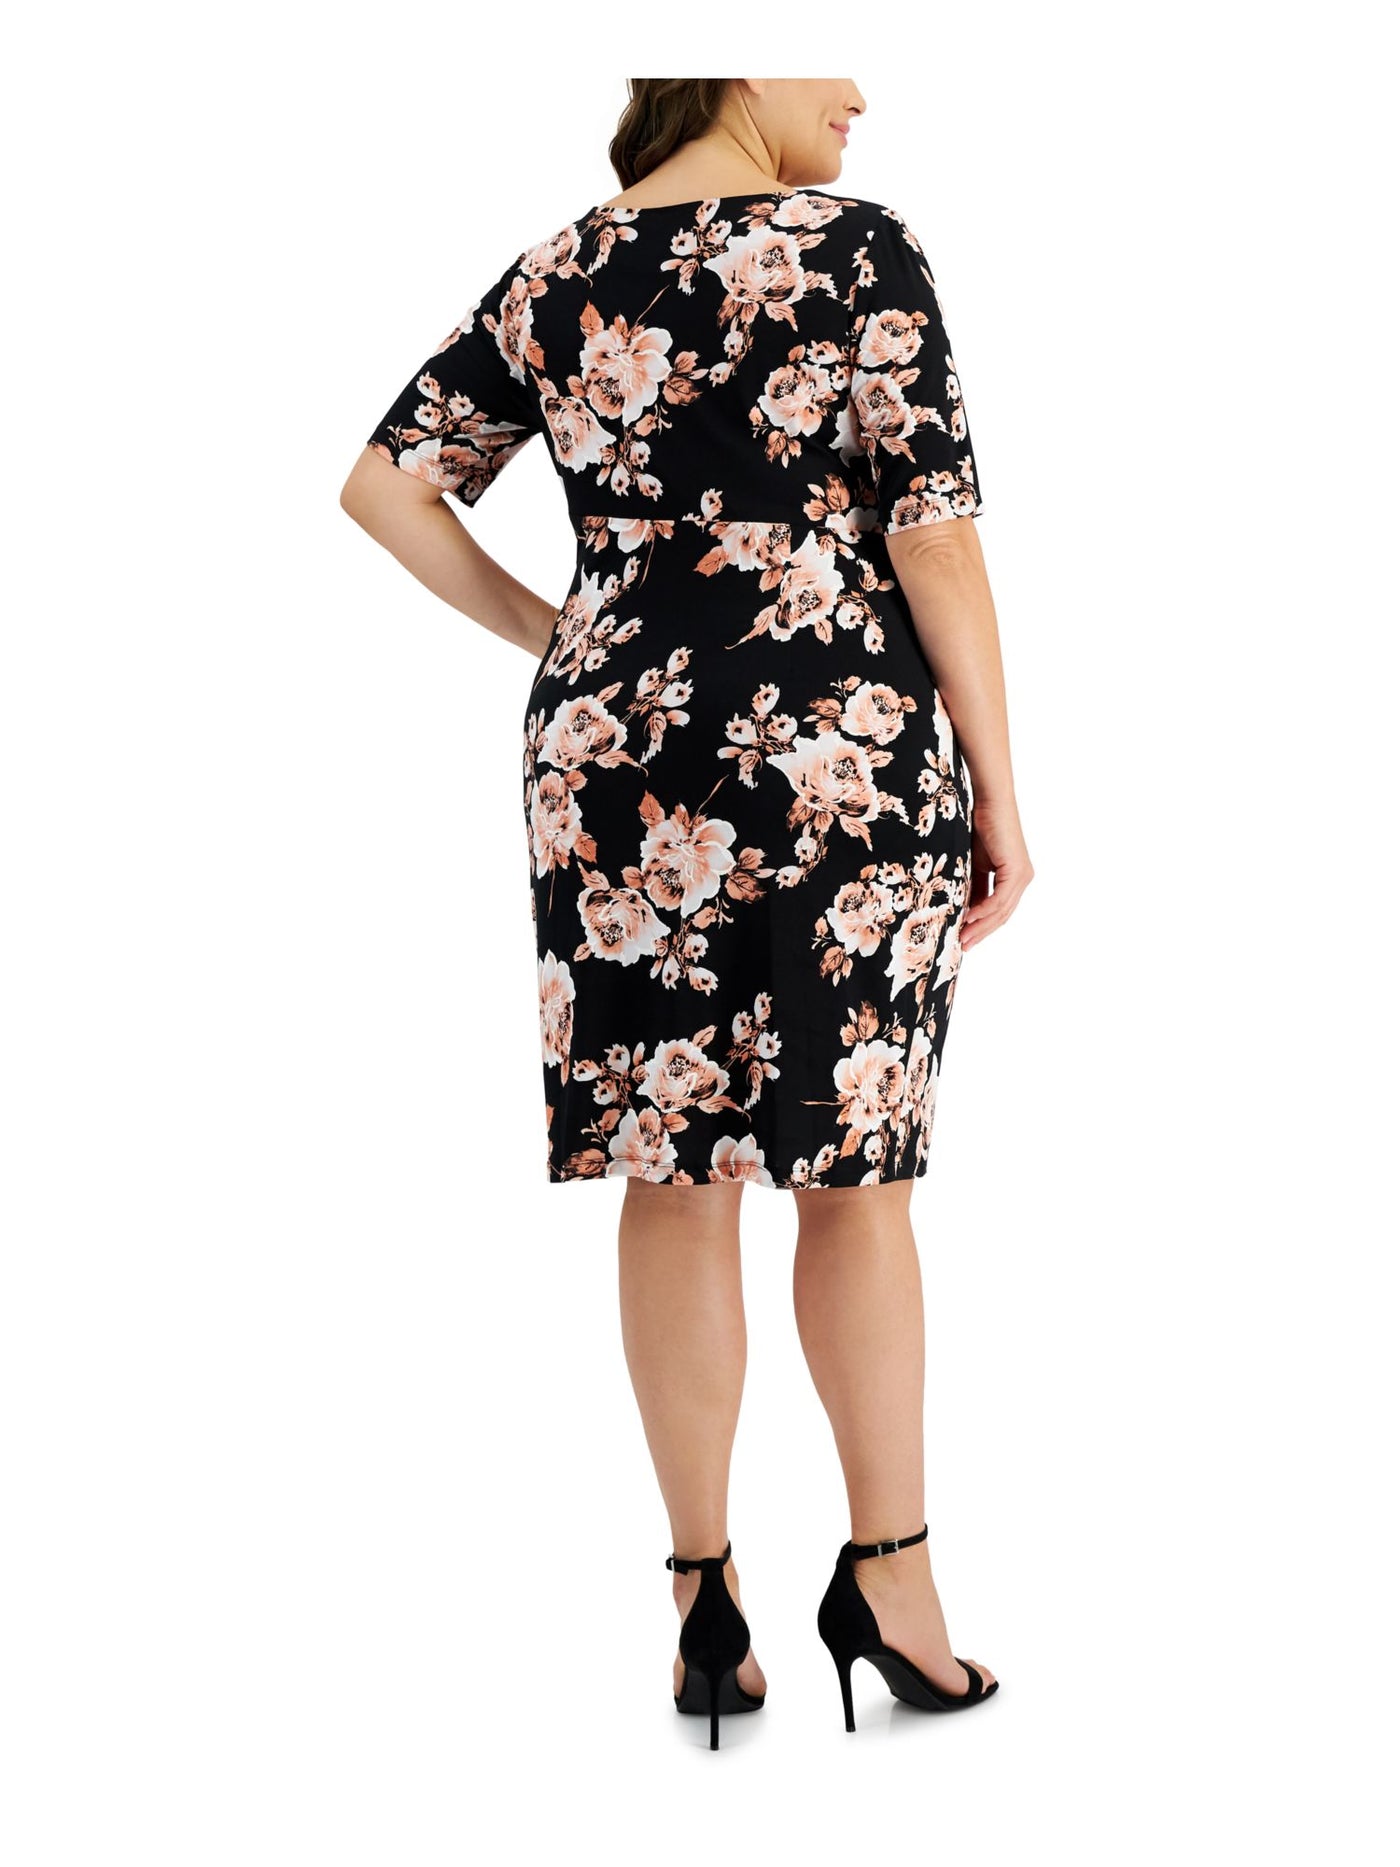 CONNECTED APPAREL Womens Black Unlined Gathered Pullover Side-tab Pleated Floral Elbow Sleeve Round Neck Below The Knee Sheath Dress Plus 24W